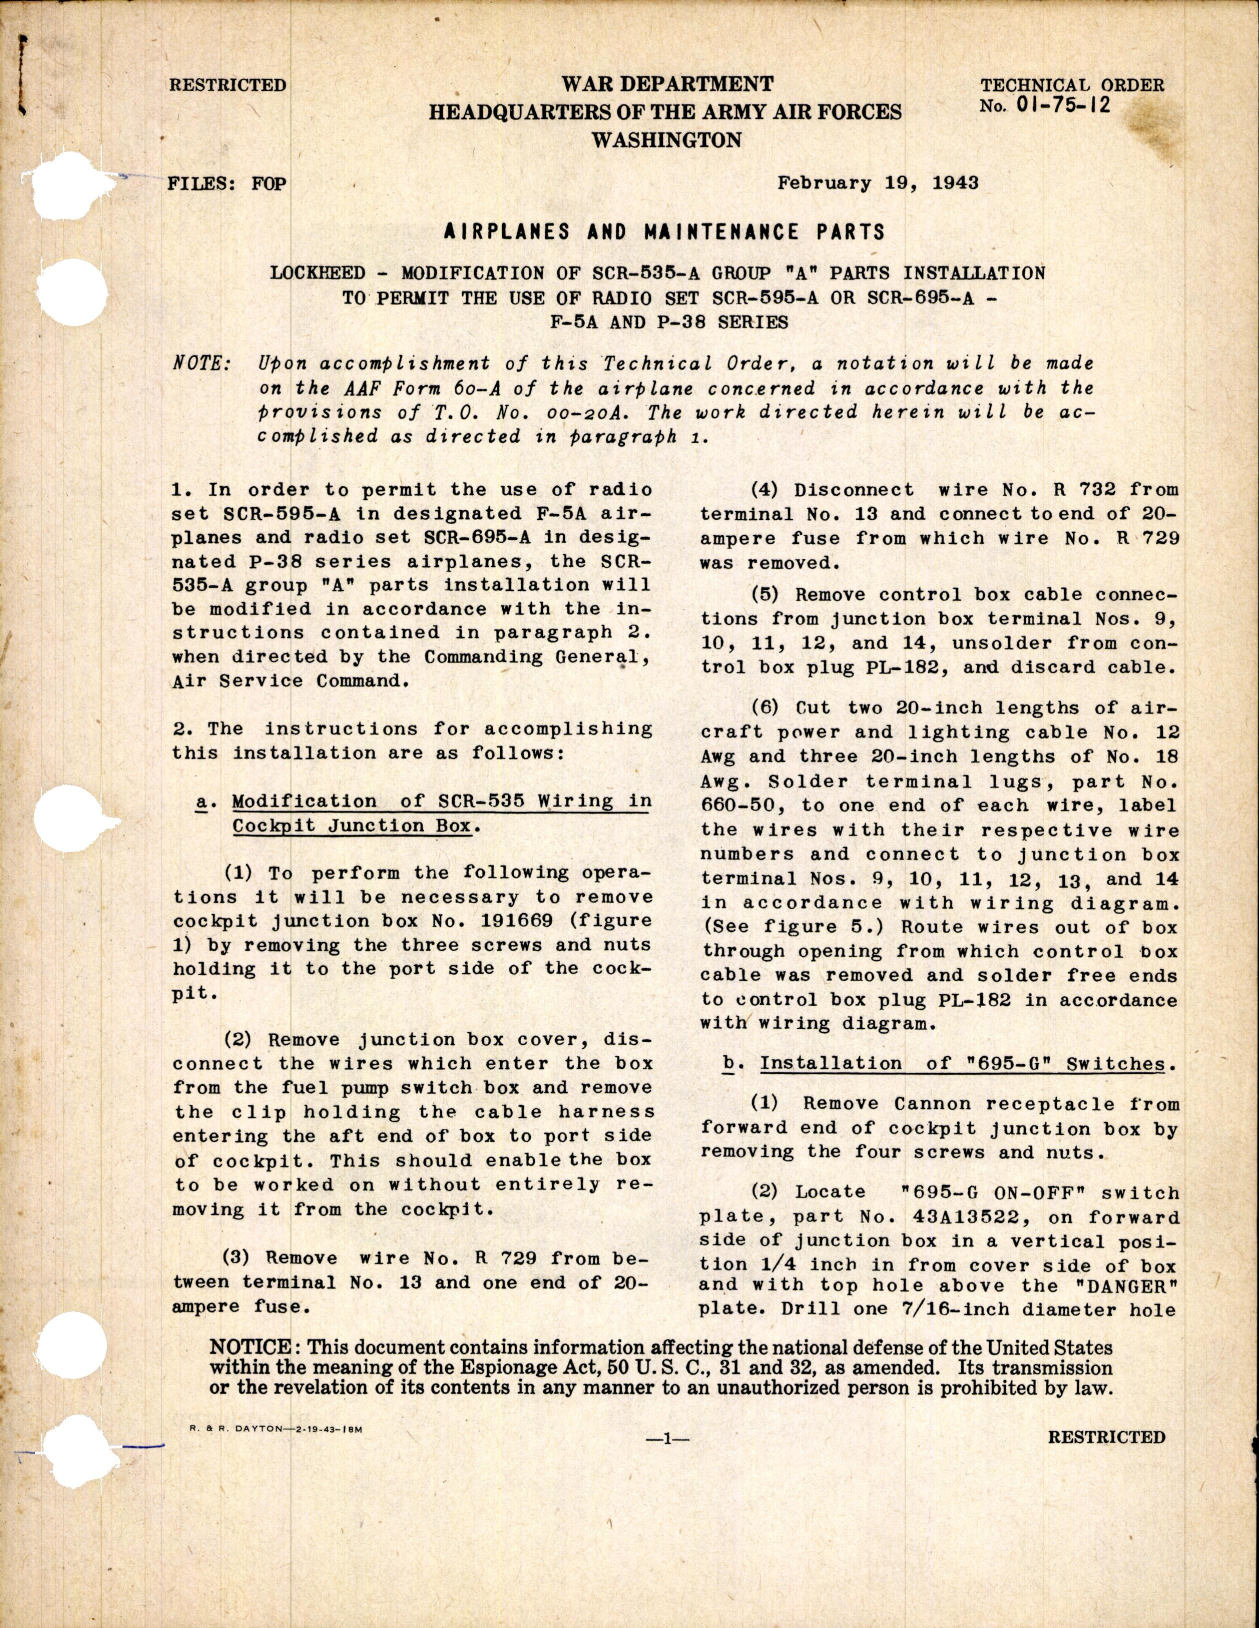 Sample page 1 from AirCorps Library document: Modification of SCR-535-A Group A Parts Installation to Permit Use of  Radio Set SCR-595-A or -695-A for P-38 Series